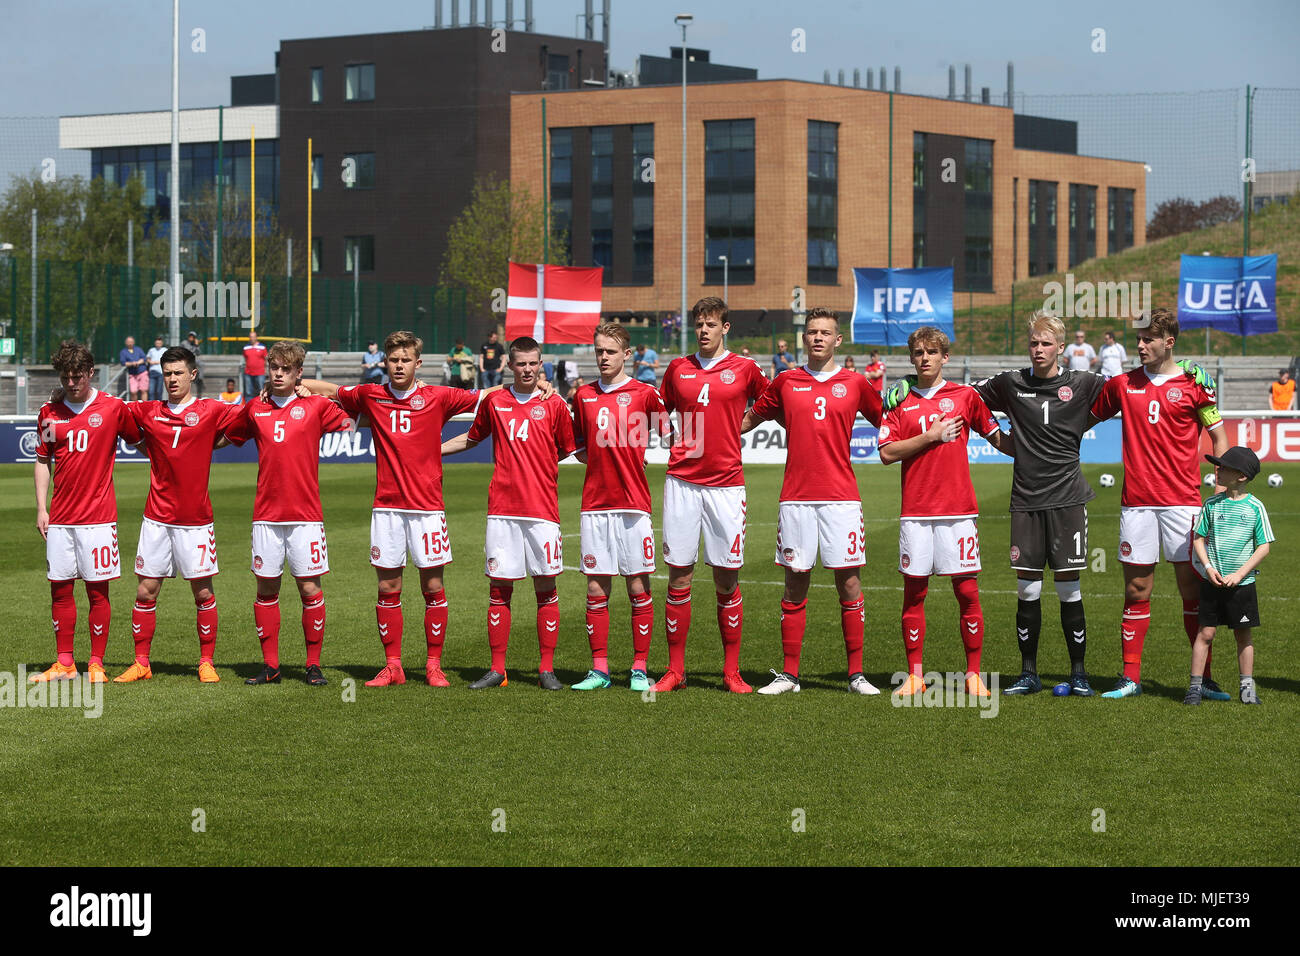 Loughborough, UK. 5th May, 2018. The Danish team sing the National Anthem before the 2018 UEFA European Under-17 Championship Group C match between Denmark and Bosnia and Herzegovina at Loughborough University Stadium on May 5th 2018 in Loughborough, England. (Photo by Paul Chesterton/phcimages.com) Credit: PHC Images/Alamy Live News Stock Photo